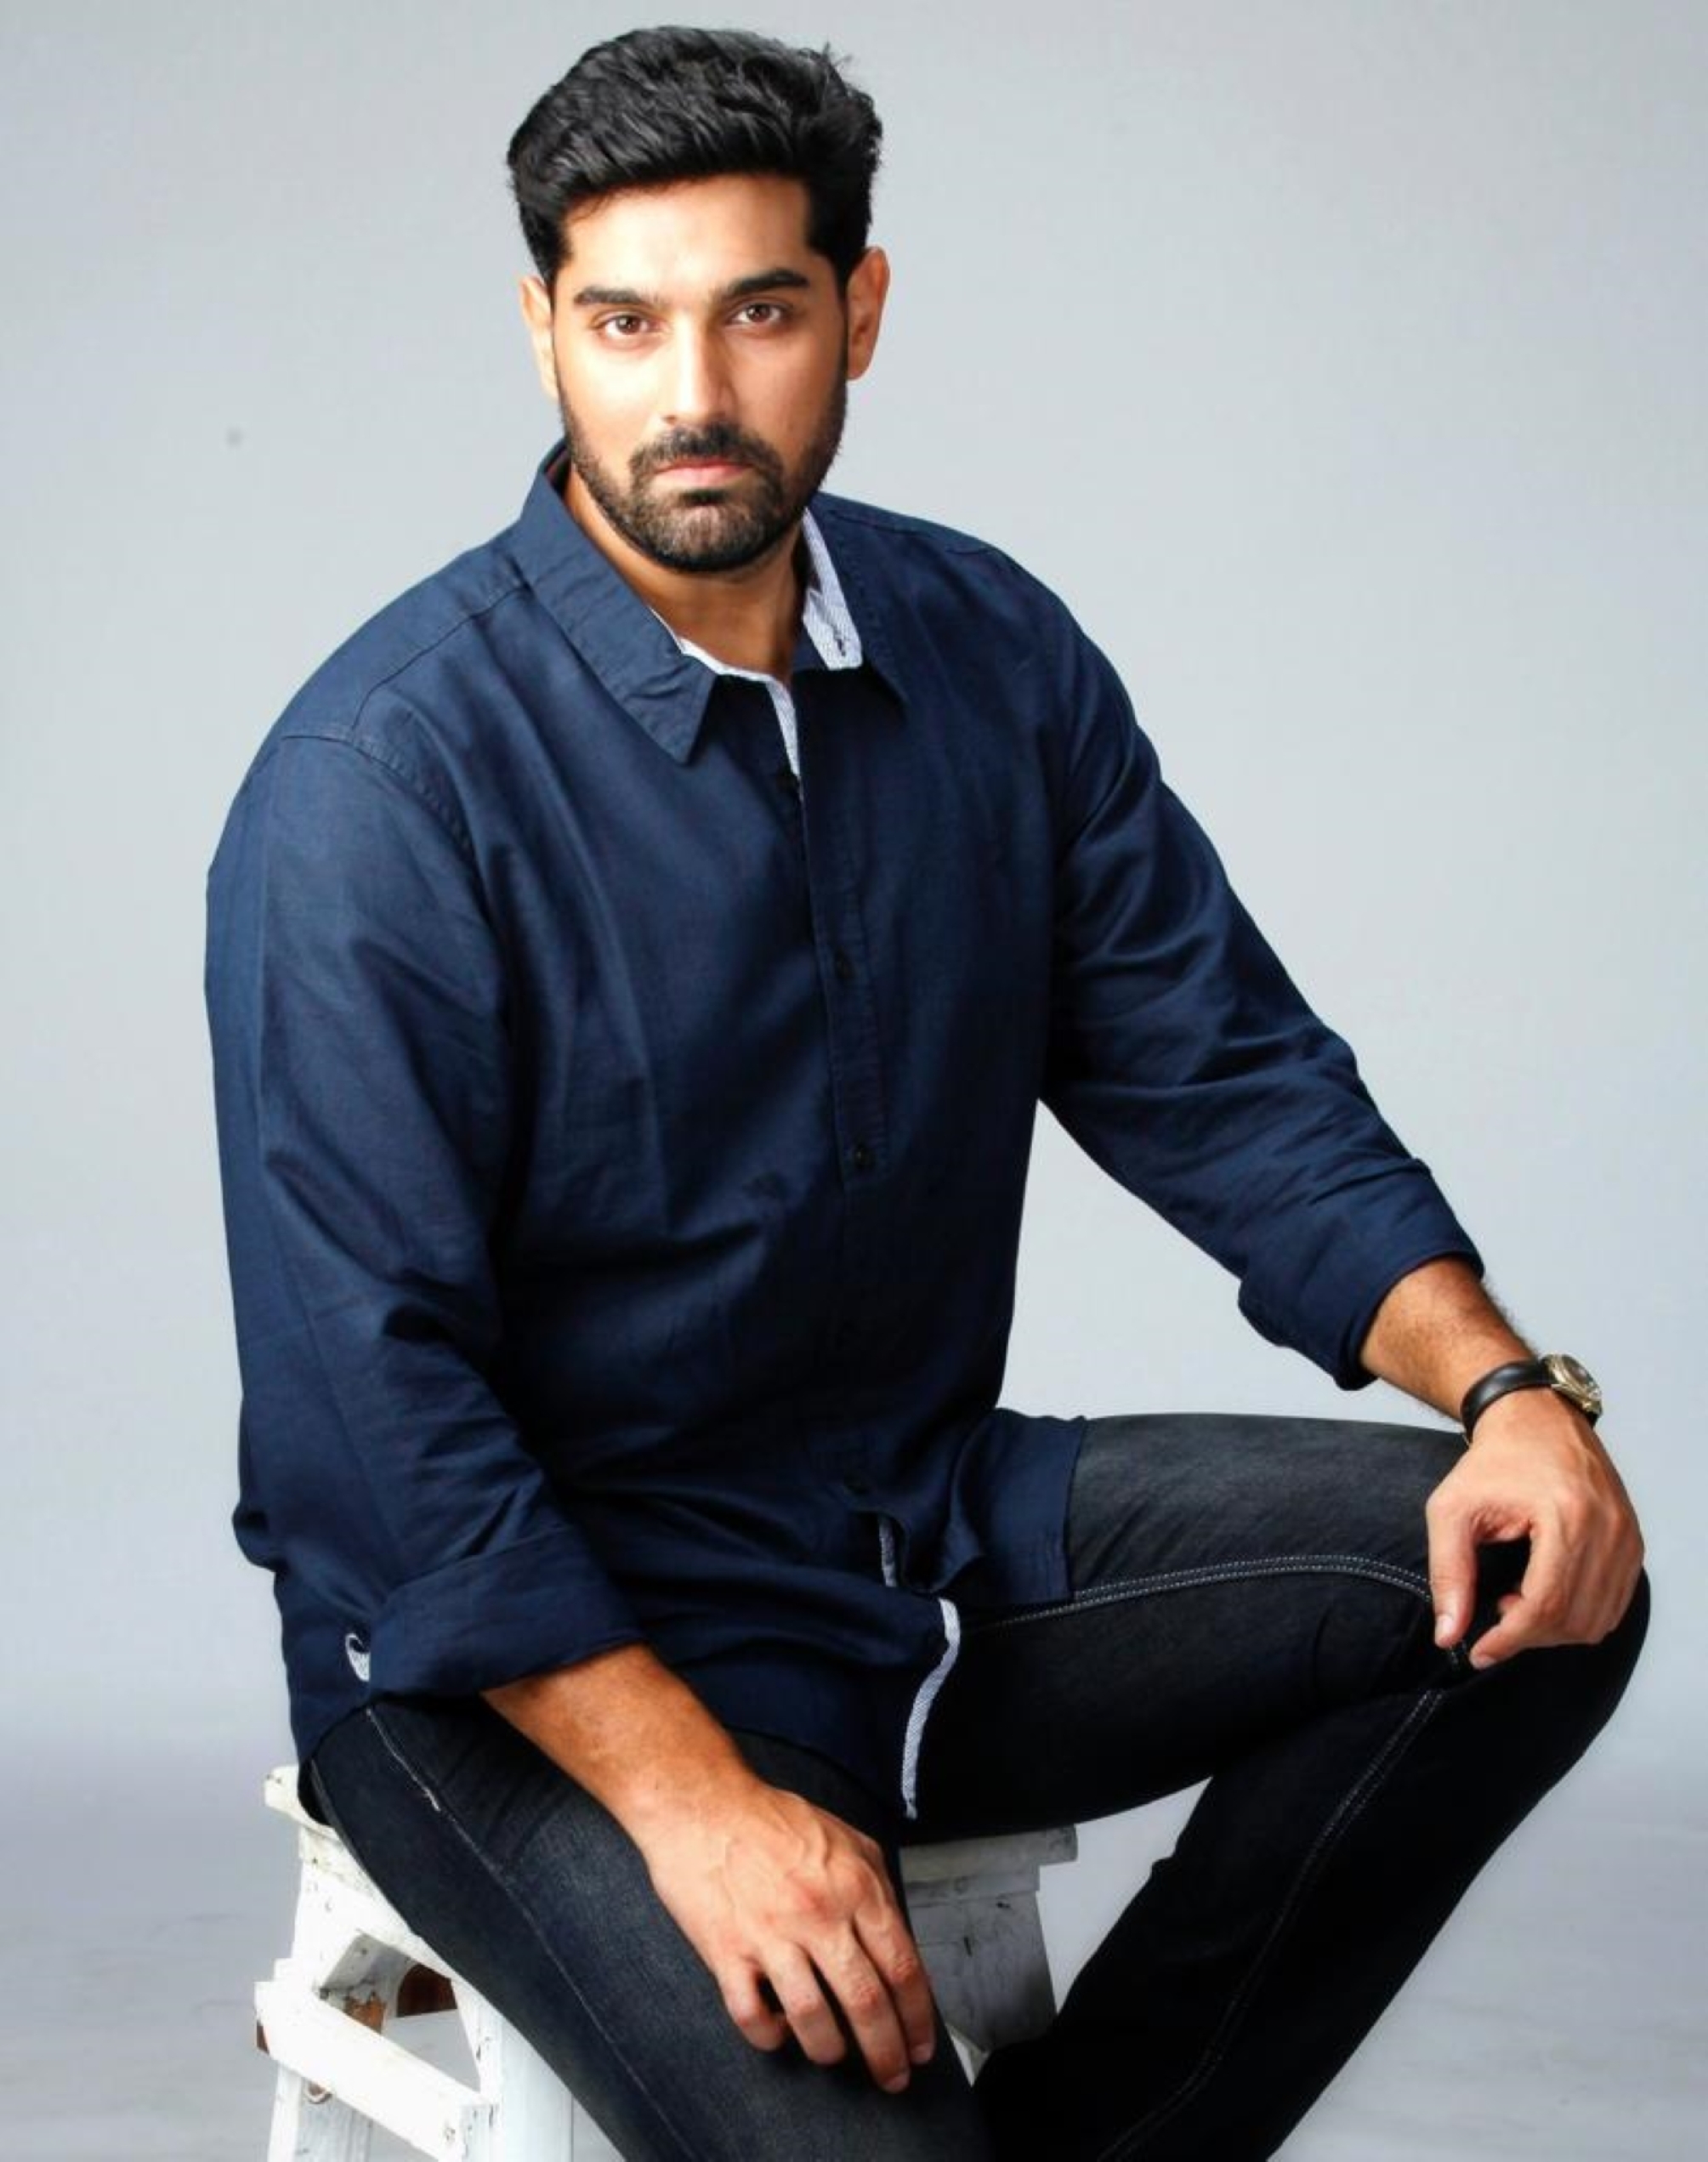 Kunaal Roy Kapur is currently seen in Voot's newly launched series 'AadhaIshq'. He talks about his personal and professional life